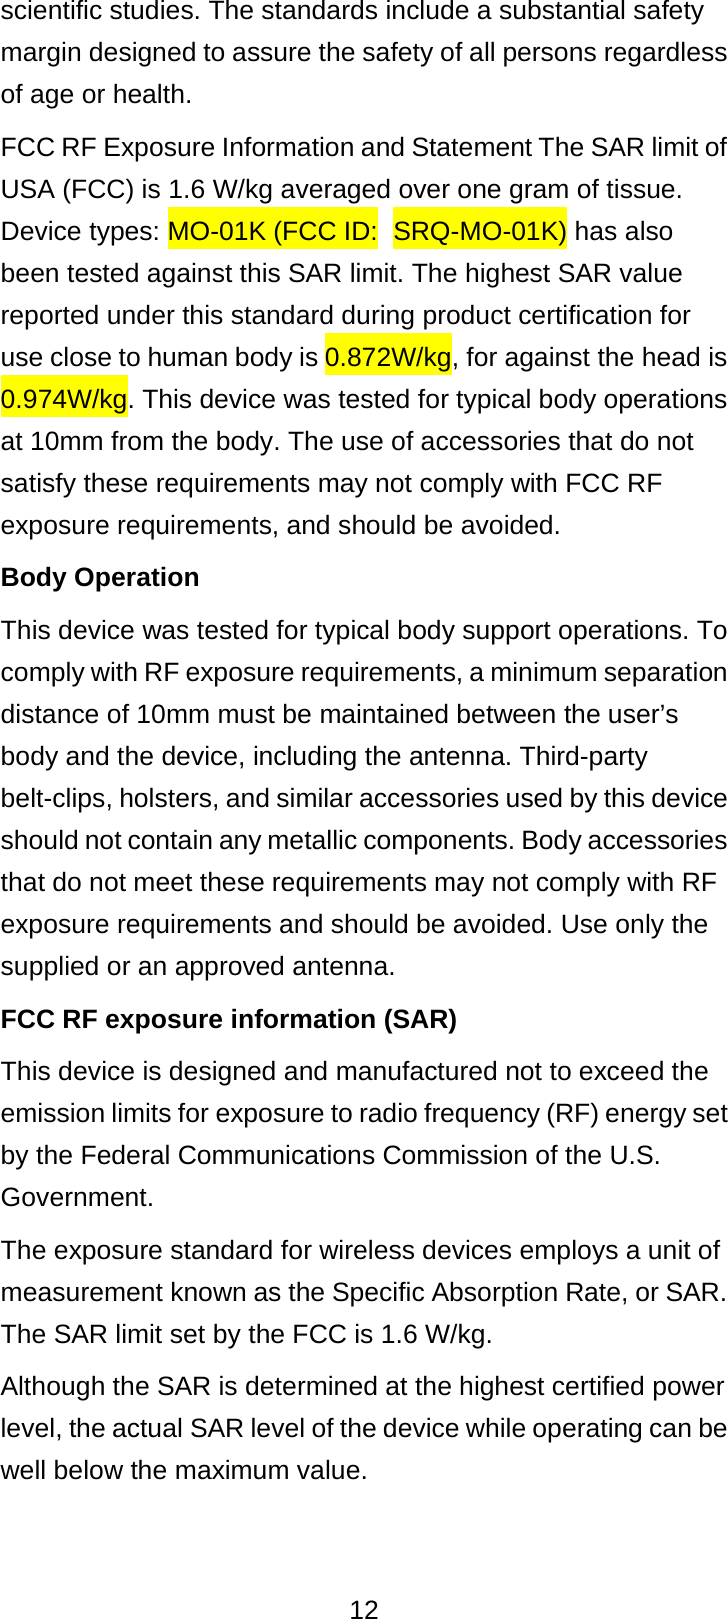  12 scientific studies. The standards include a substantial safety margin designed to assure the safety of all persons regardless of age or health. FCC RF Exposure Information and Statement The SAR limit of USA (FCC) is 1.6 W/kg averaged over one gram of tissue. Device types: MO-01K (FCC ID: SRQ-MO-01K) has also been tested against this SAR limit. The highest SAR value reported under this standard during product certification for use close to human body is 0.872W/kg, for against the head is 0.974W/kg. This device was tested for typical body operations at 10mm from the body. The use of accessories that do not satisfy these requirements may not comply with FCC RF exposure requirements, and should be avoided. Body Operation This device was tested for typical body support operations. To comply with RF exposure requirements, a minimum separation distance of 10mm must be maintained between the user’s body and the device, including the antenna. Third-party belt-clips, holsters, and similar accessories used by this device should not contain any metallic components. Body accessories that do not meet these requirements may not comply with RF exposure requirements and should be avoided. Use only the supplied or an approved antenna. FCC RF exposure information (SAR) This device is designed and manufactured not to exceed the emission limits for exposure to radio frequency (RF) energy set by the Federal Communications Commission of the U.S. Government. The exposure standard for wireless devices employs a unit of measurement known as the Specific Absorption Rate, or SAR. The SAR limit set by the FCC is 1.6 W/kg. Although the SAR is determined at the highest certified power level, the actual SAR level of the device while operating can be well below the maximum value.  